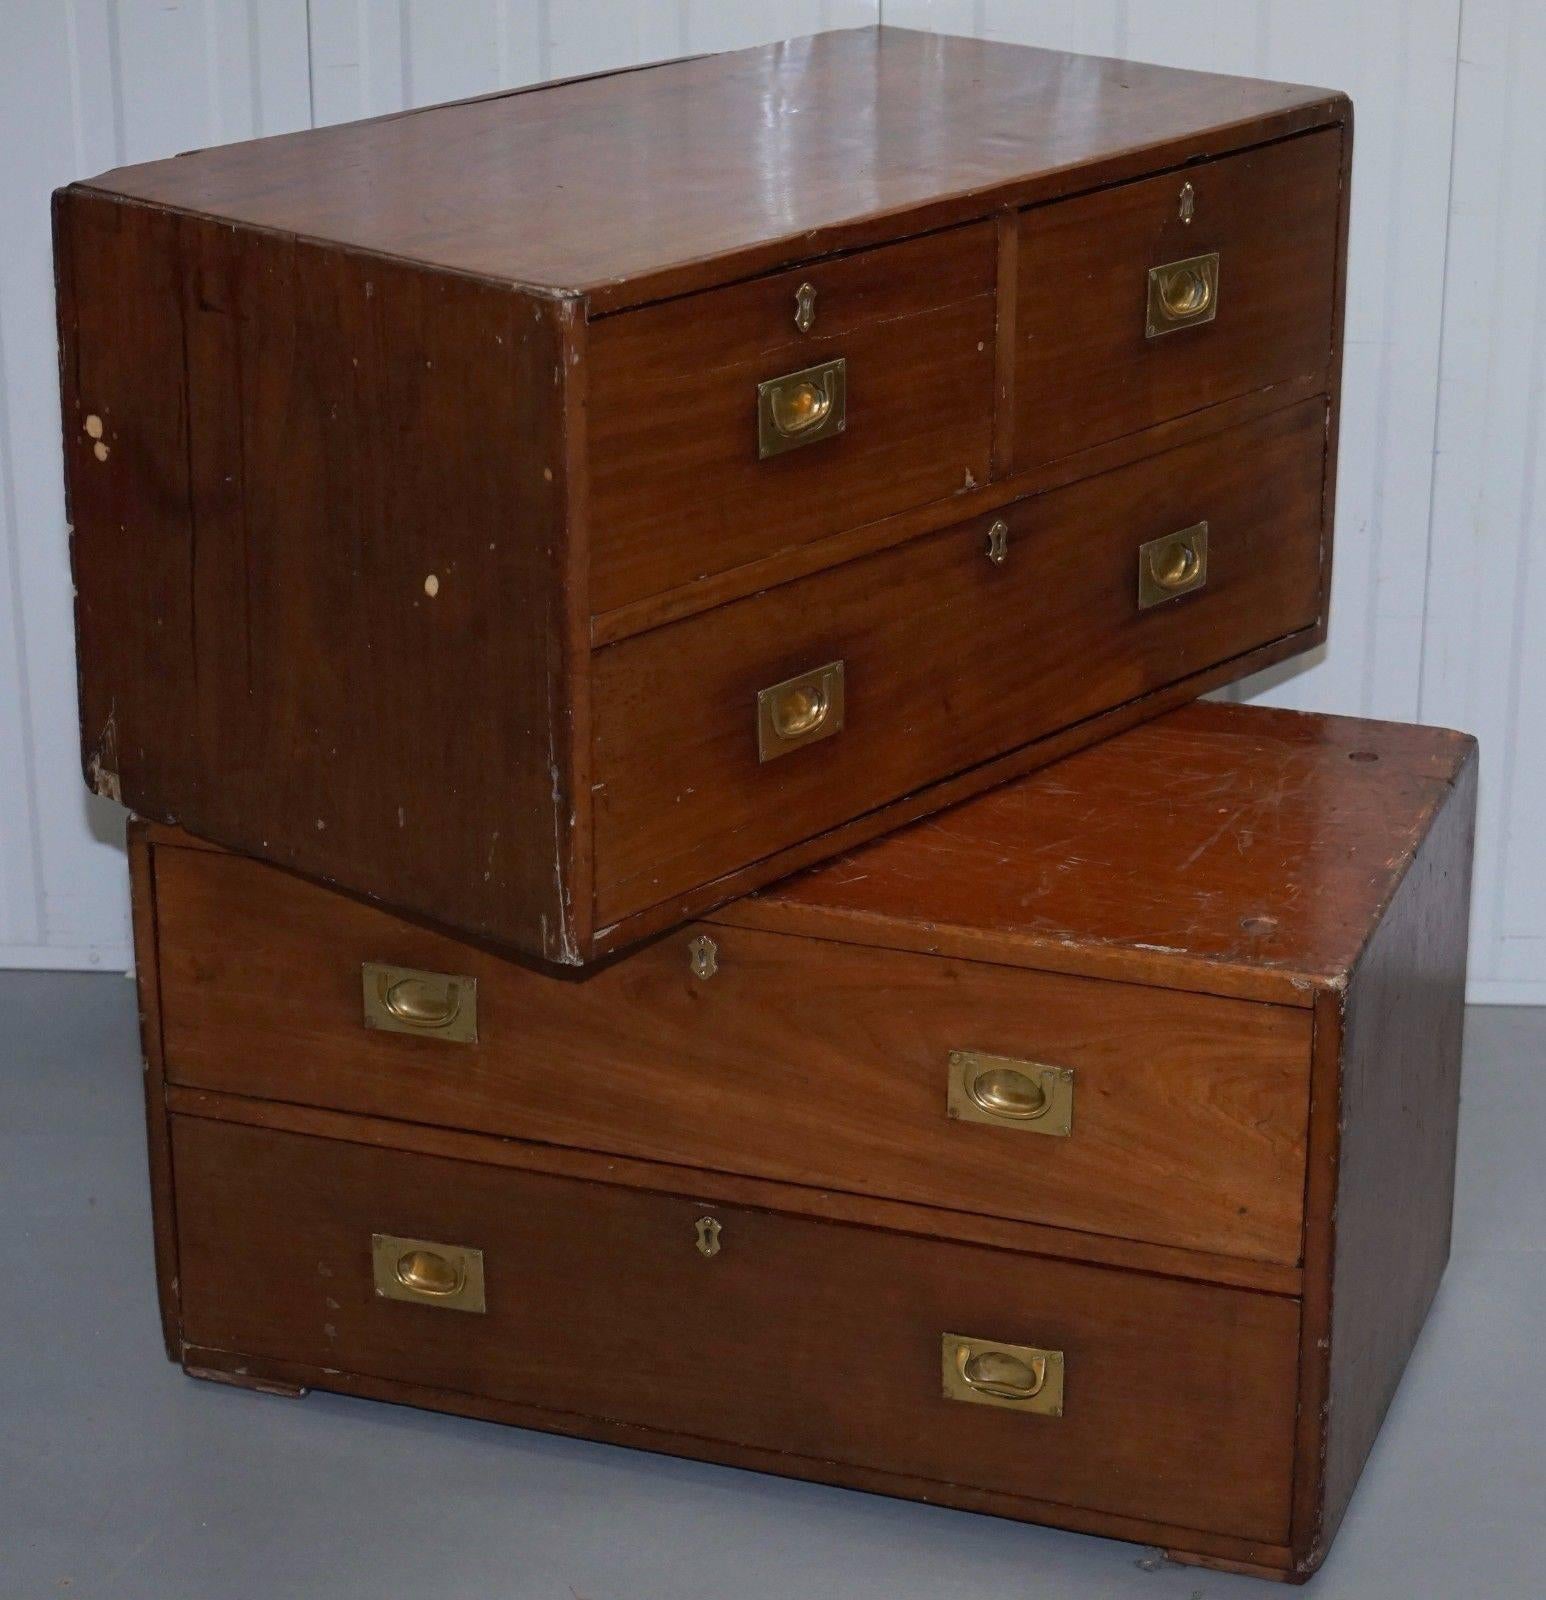 Wimbledon-Furniture

Wimbledon-Furniture is delighted to offer for sale lovely original period Campaign used Military chest of drawers

Please note the delivery fee listed is just a guide, for an accurate quote please send me your postcode and I’ll